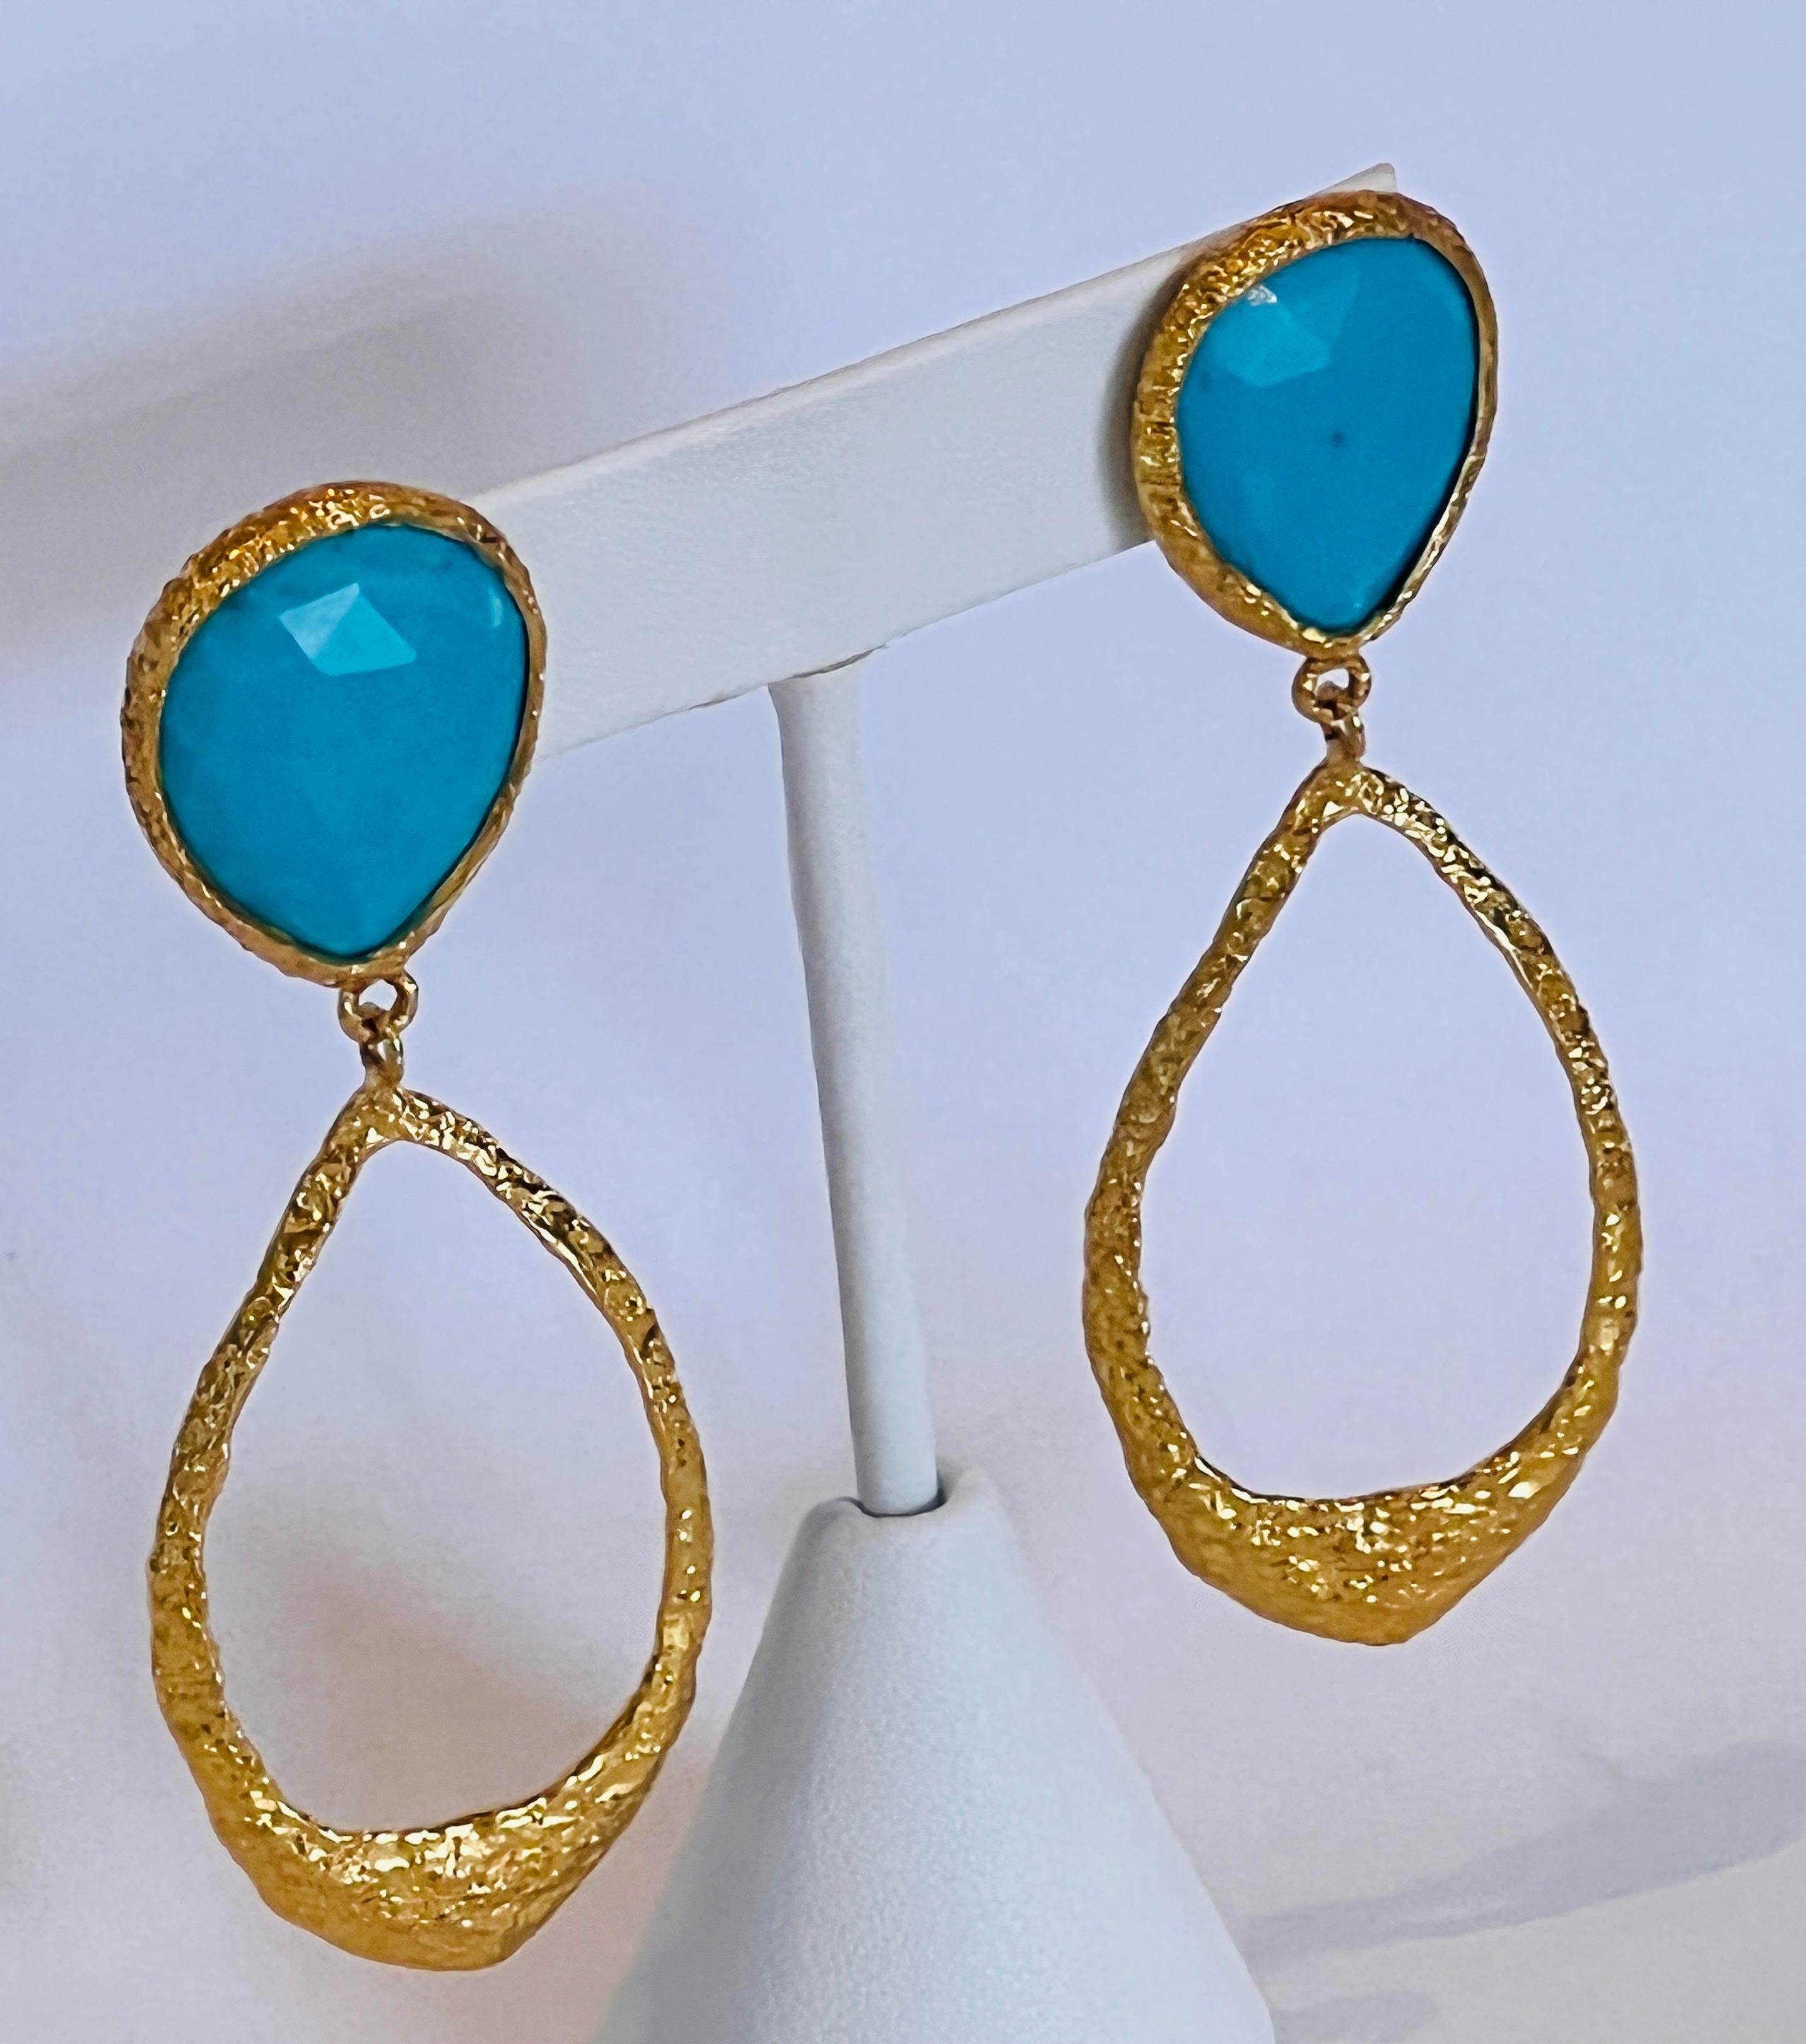 antique large 22k yellow gold handcrafted middle eastern hanging earrings